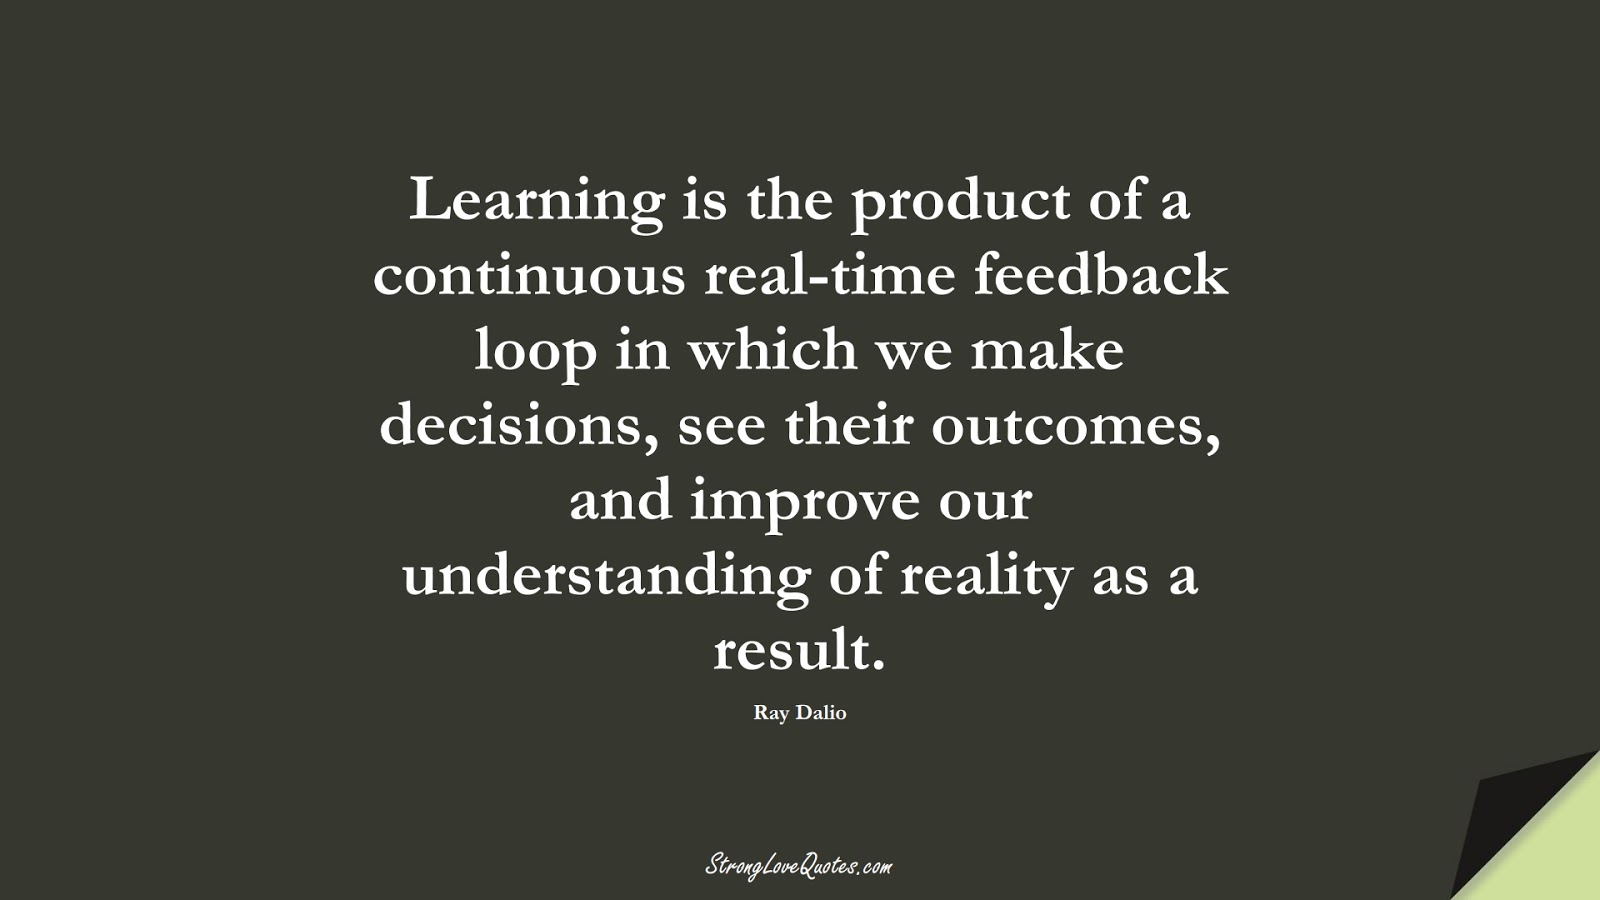 Learning is the product of a continuous real-time feedback loop in which we make decisions, see their outcomes, and improve our understanding of reality as a result. (Ray Dalio);  #LearningQuotes